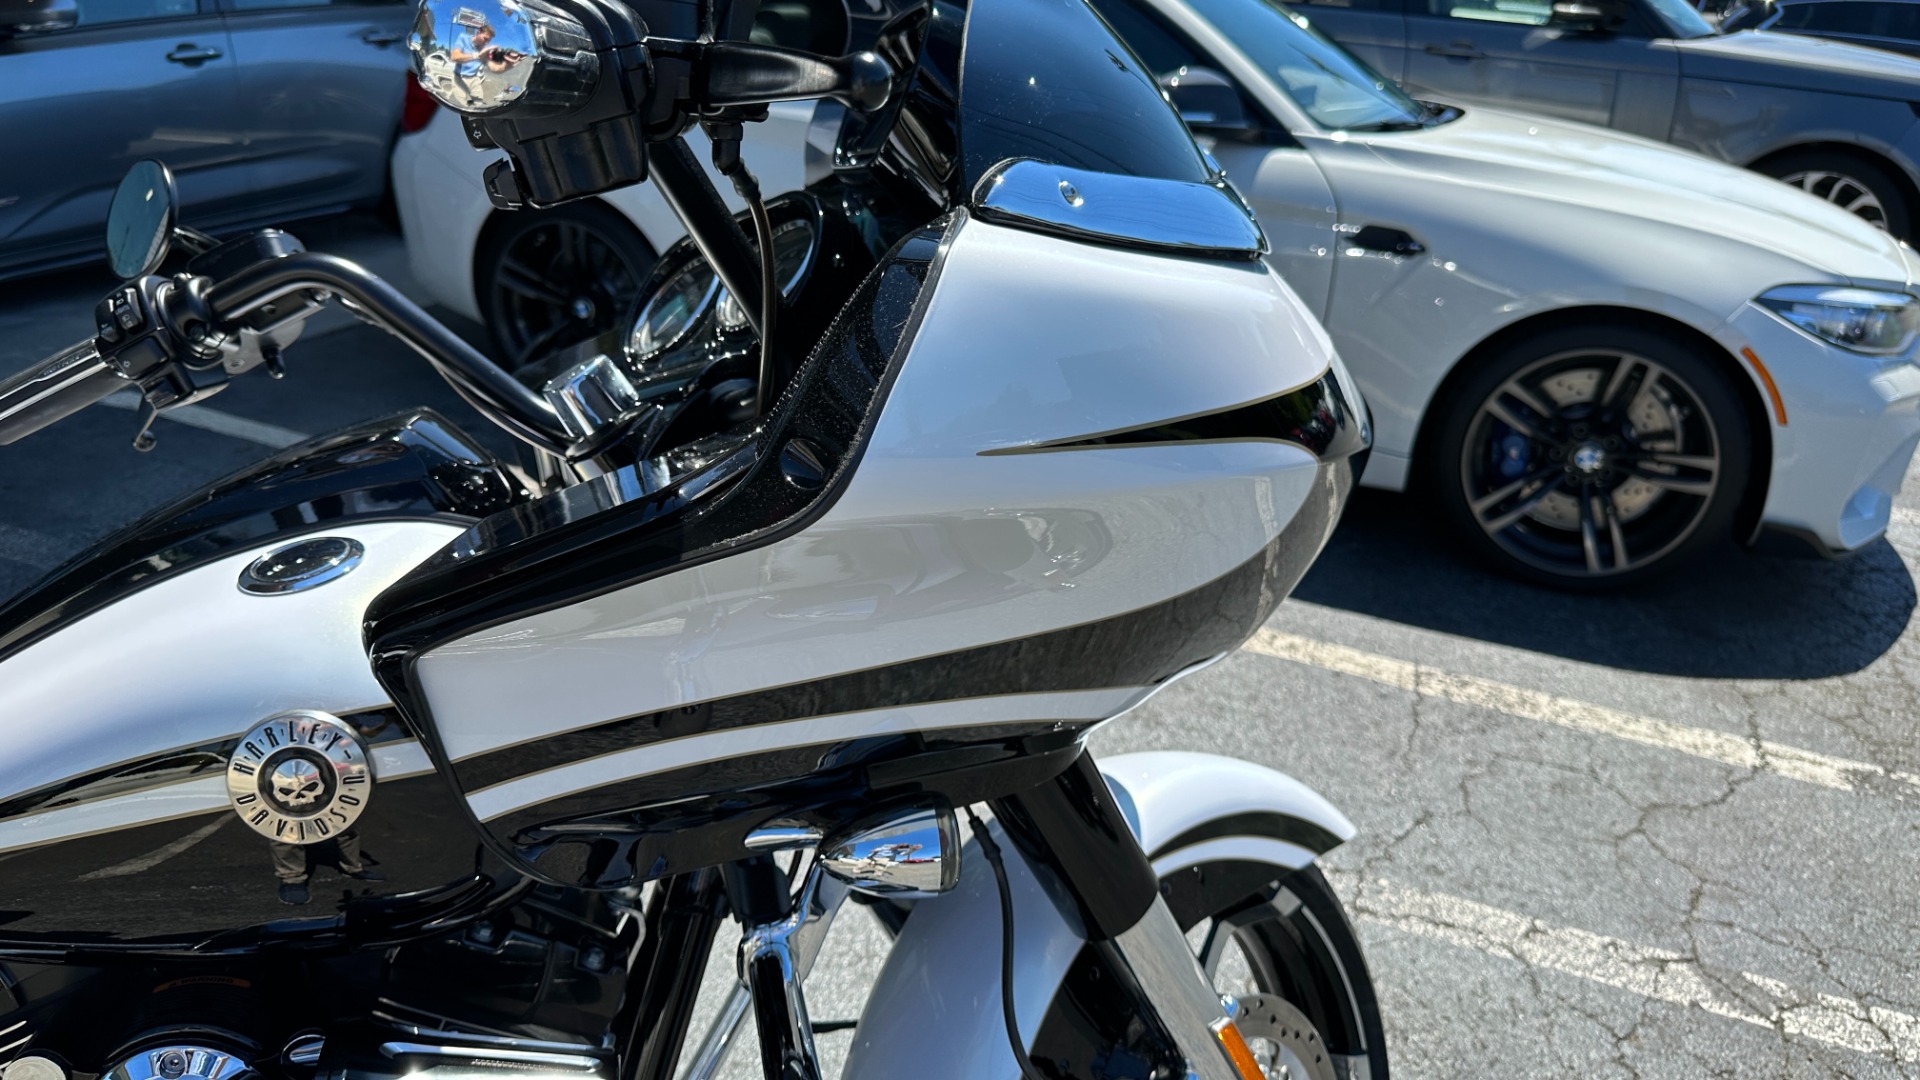 Used 2012 Harley Davidson FLTRXSE CVO Road Glide Custom CVO PAINT / RINEHART EXHAUST / SCREAMING EAGLE 110 ENGINE for sale $32,000 at Formula Imports in Charlotte NC 28227 16